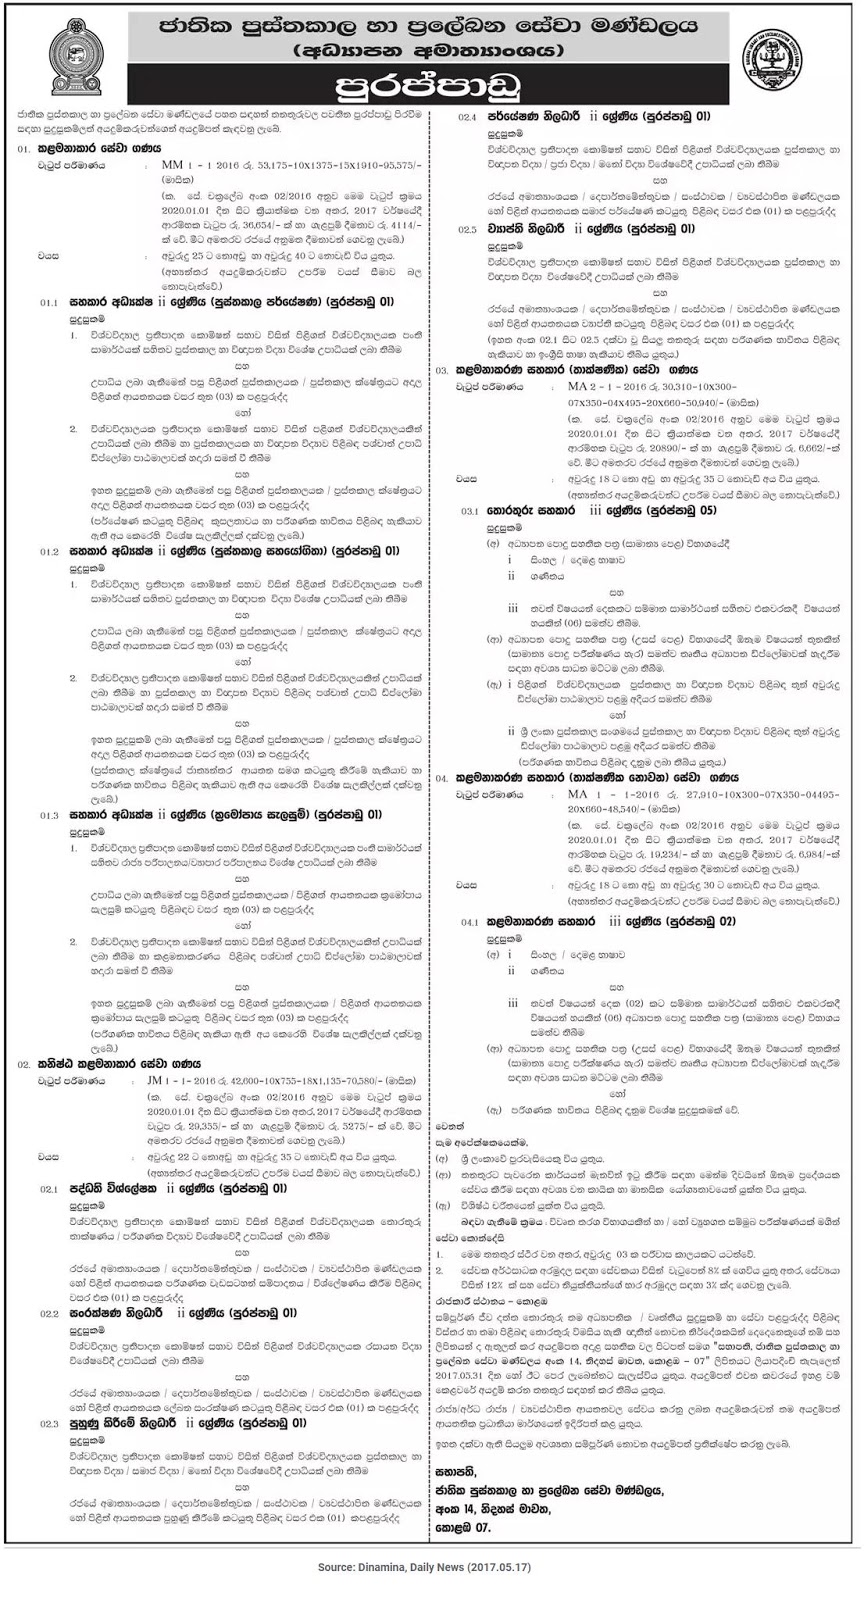 Vacancies Details of National Library & Documentation Services Board